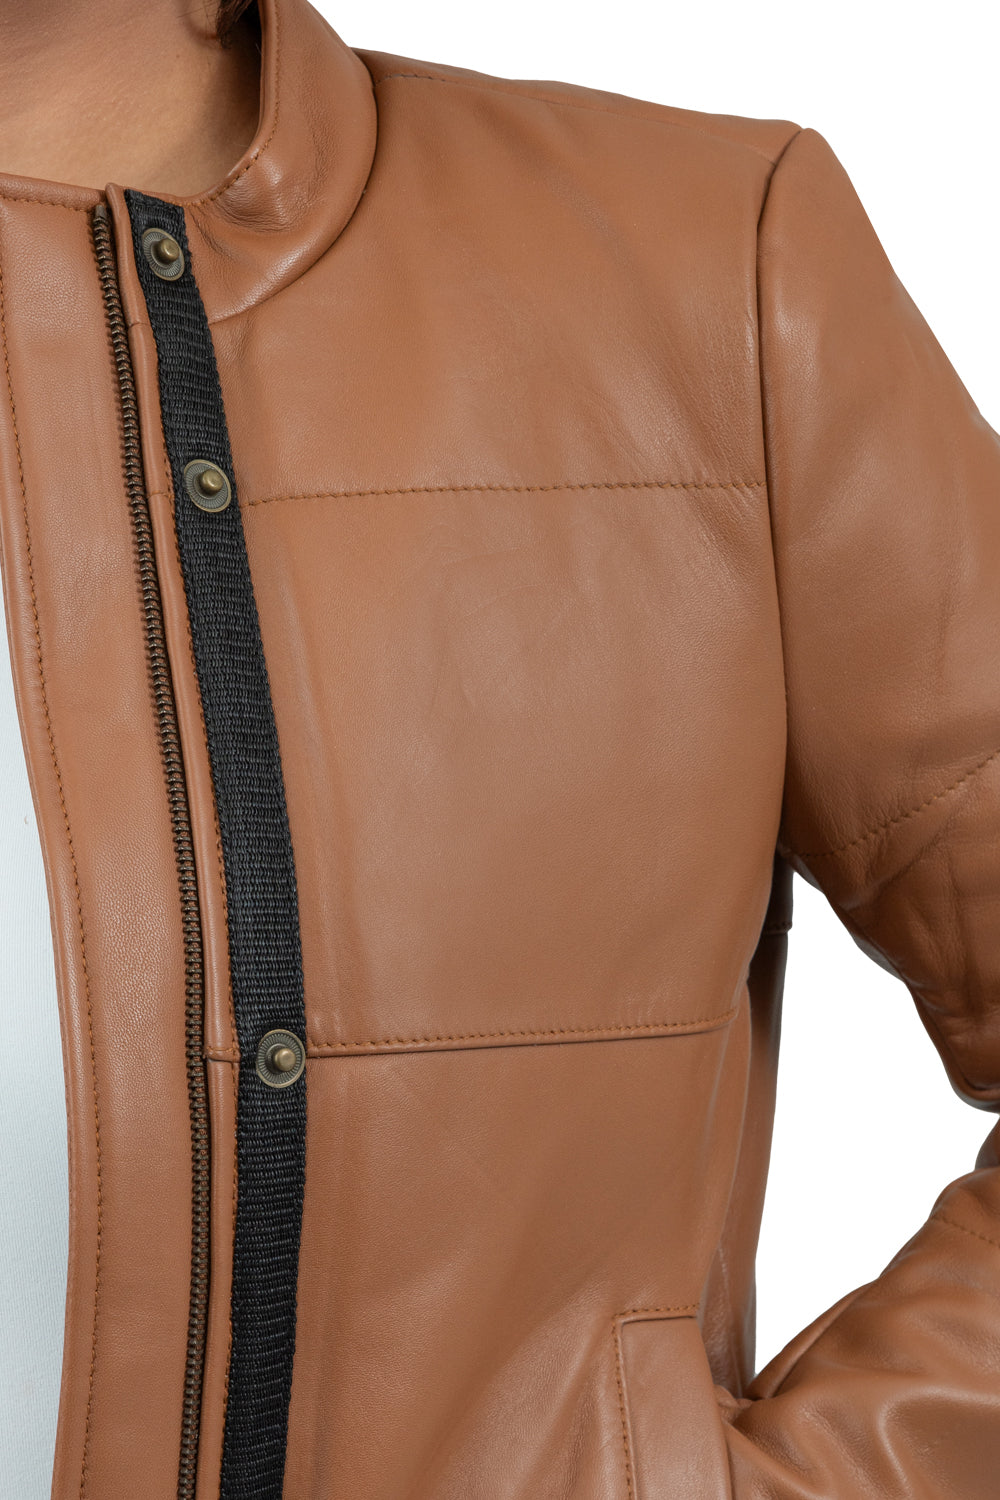 First Manufacturing Melysa - Women's Leather Jacket, Cognac